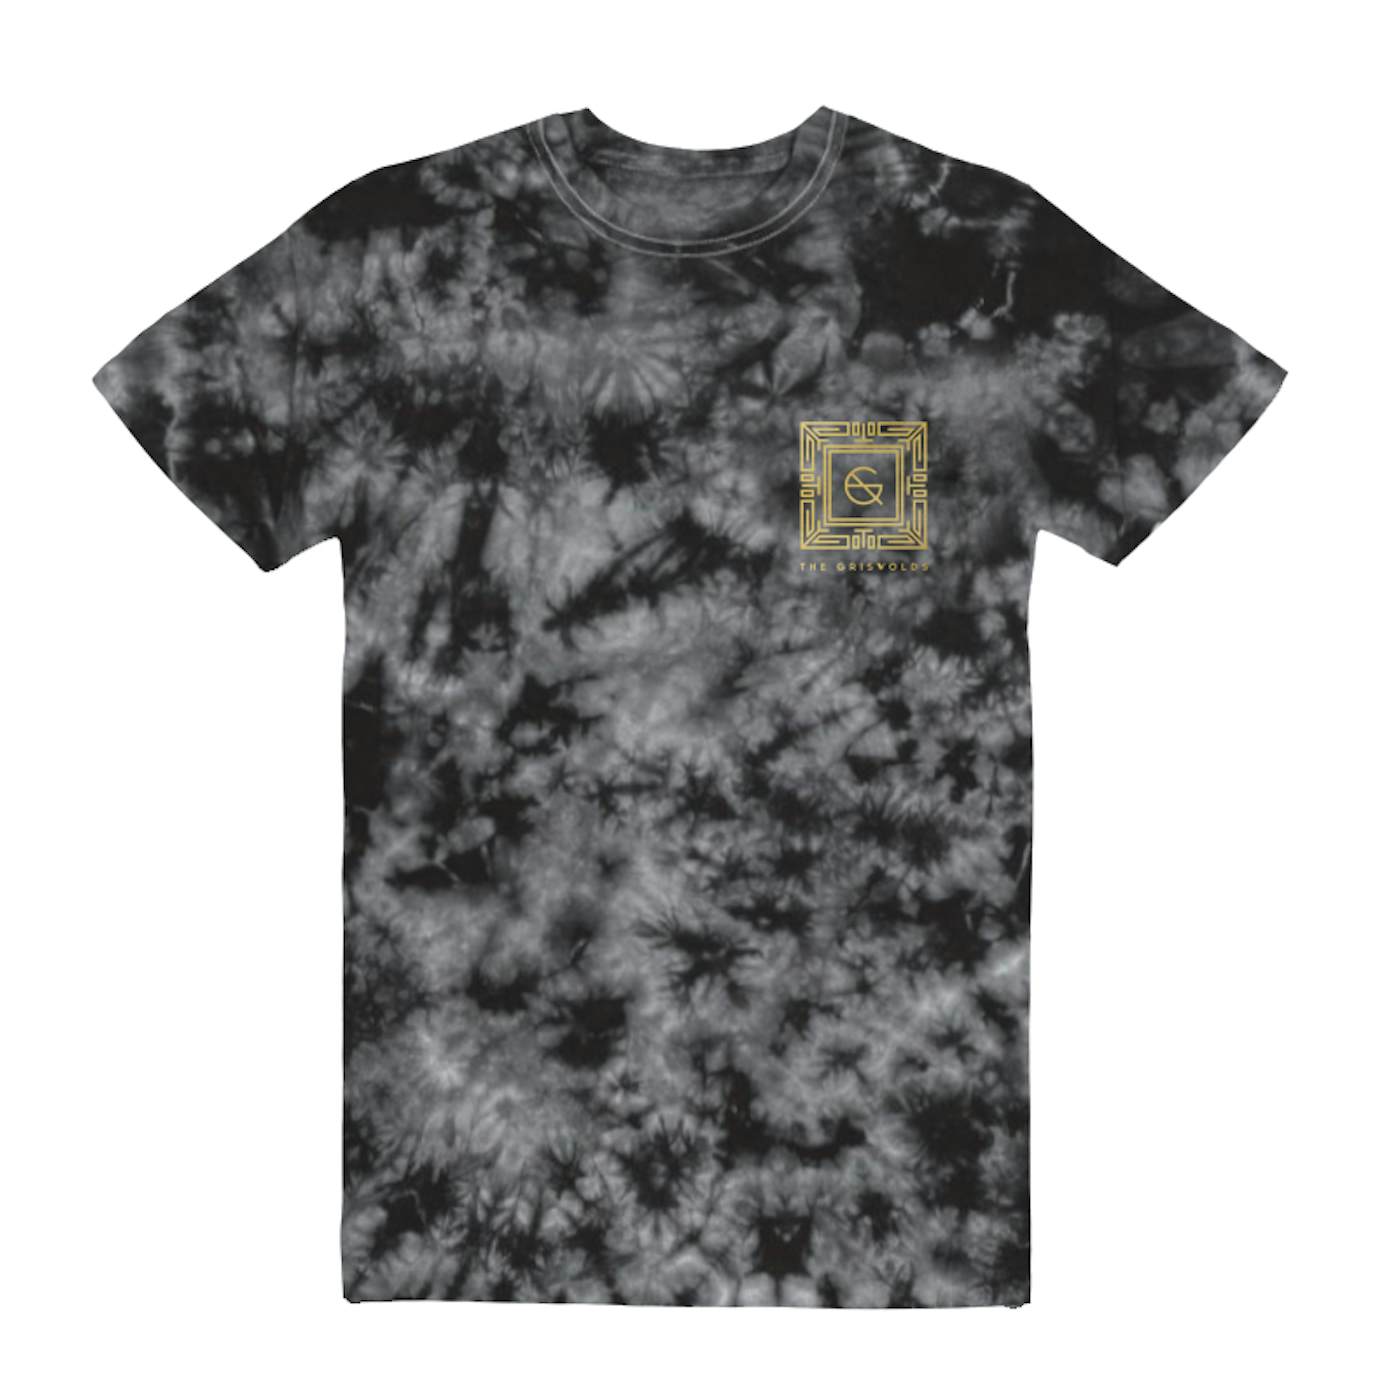 The Griswolds - Logo Tie-Dye Tee and CD Bundle